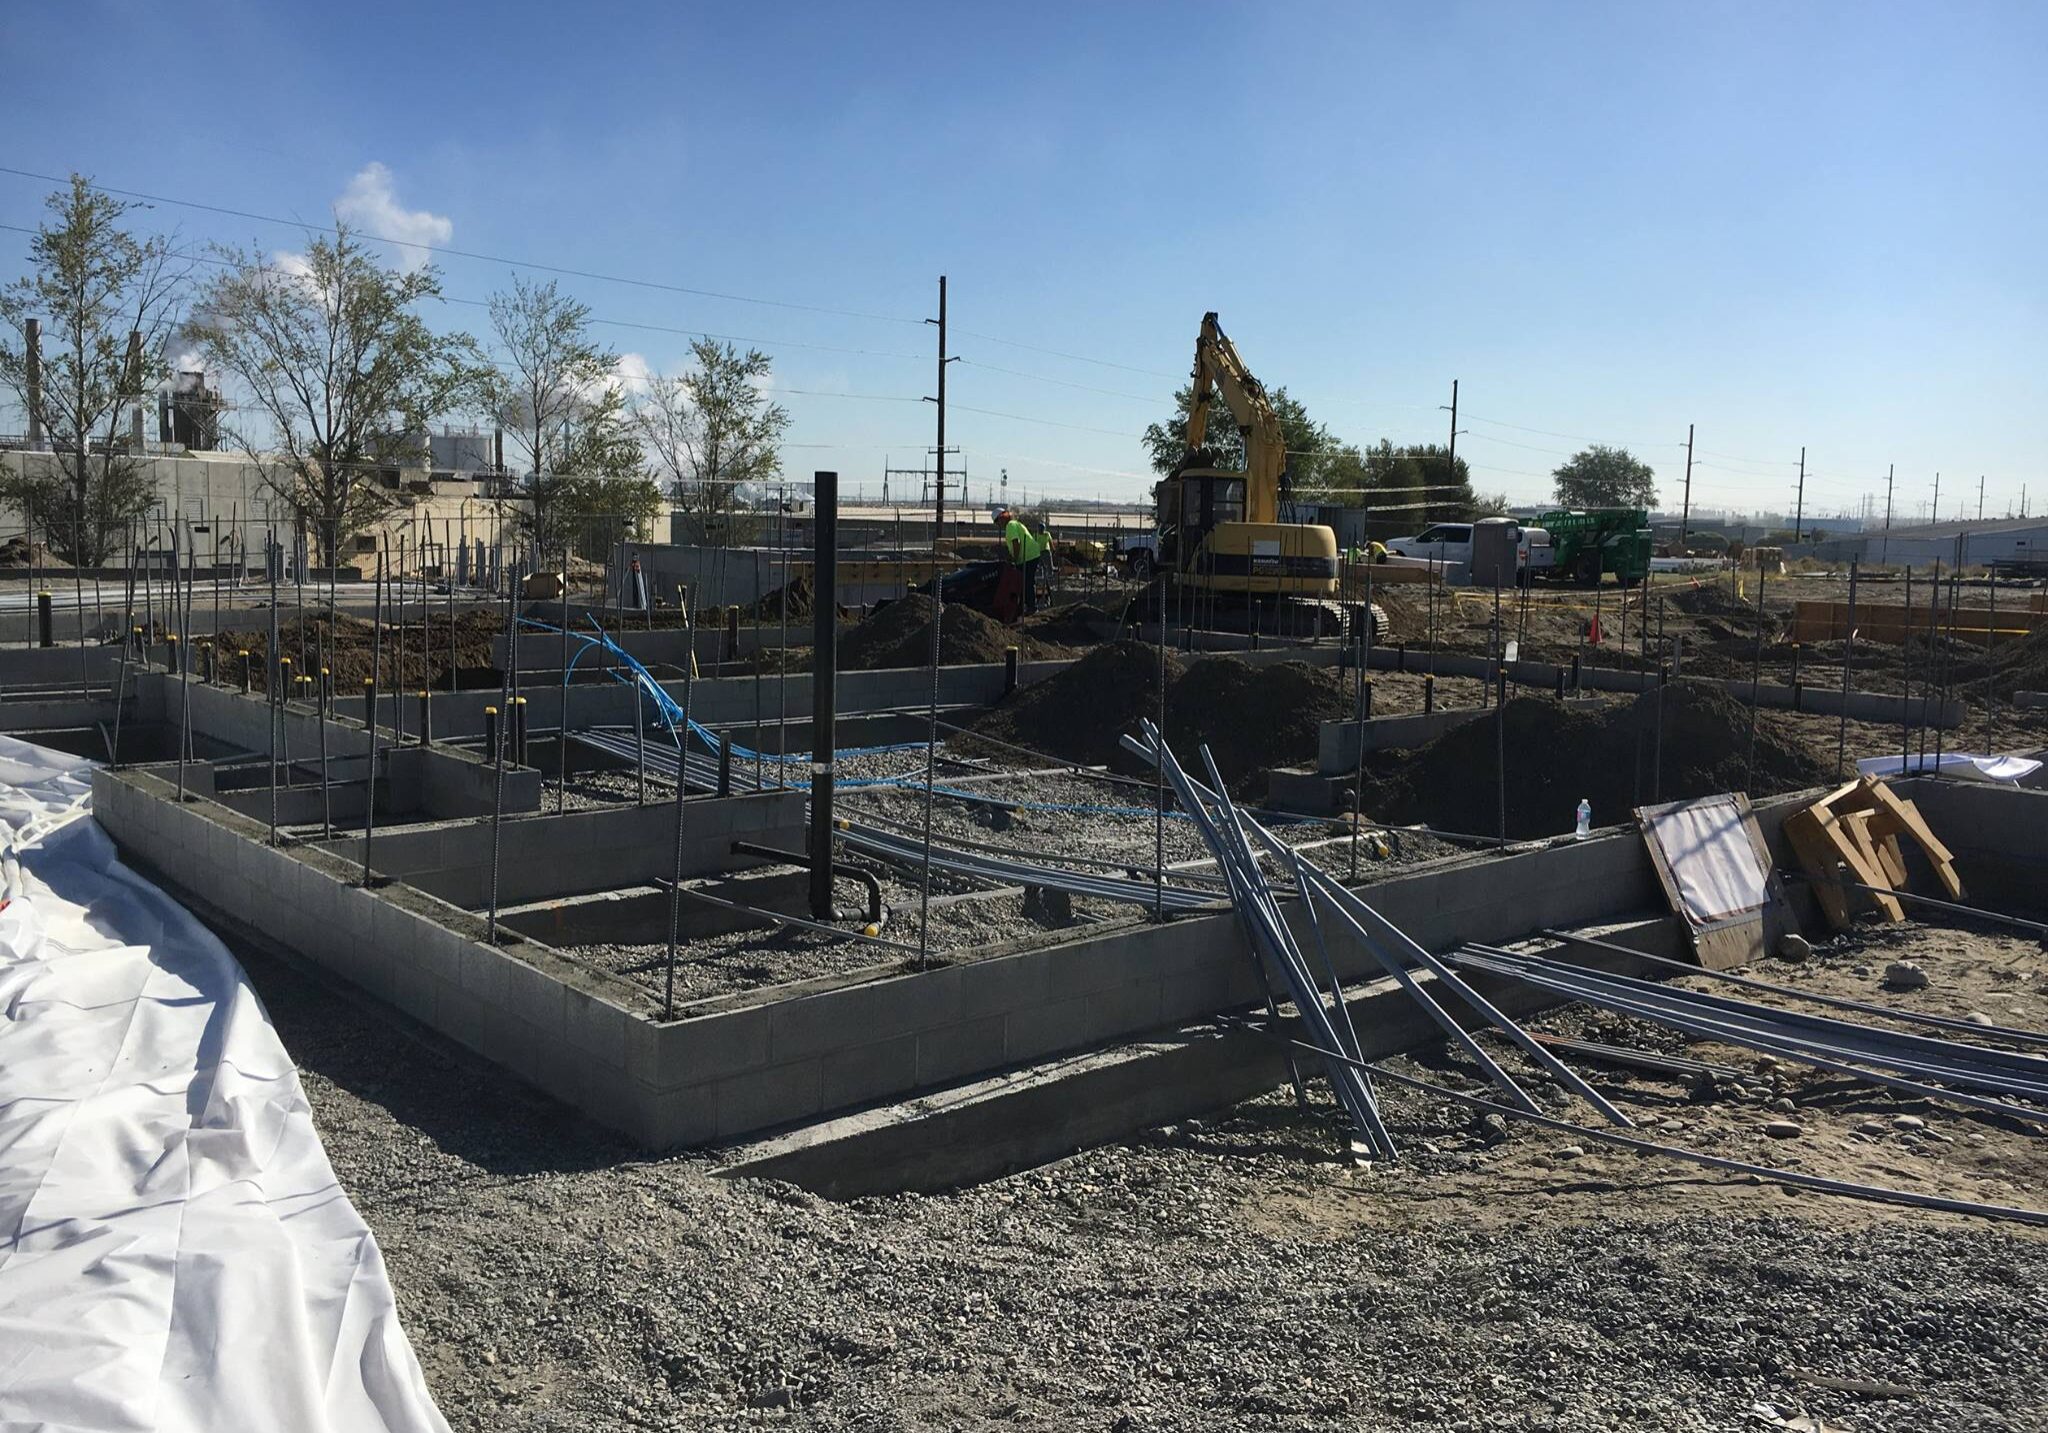 Pool & Recreation Center construction laying the foundation and pouring concrete.